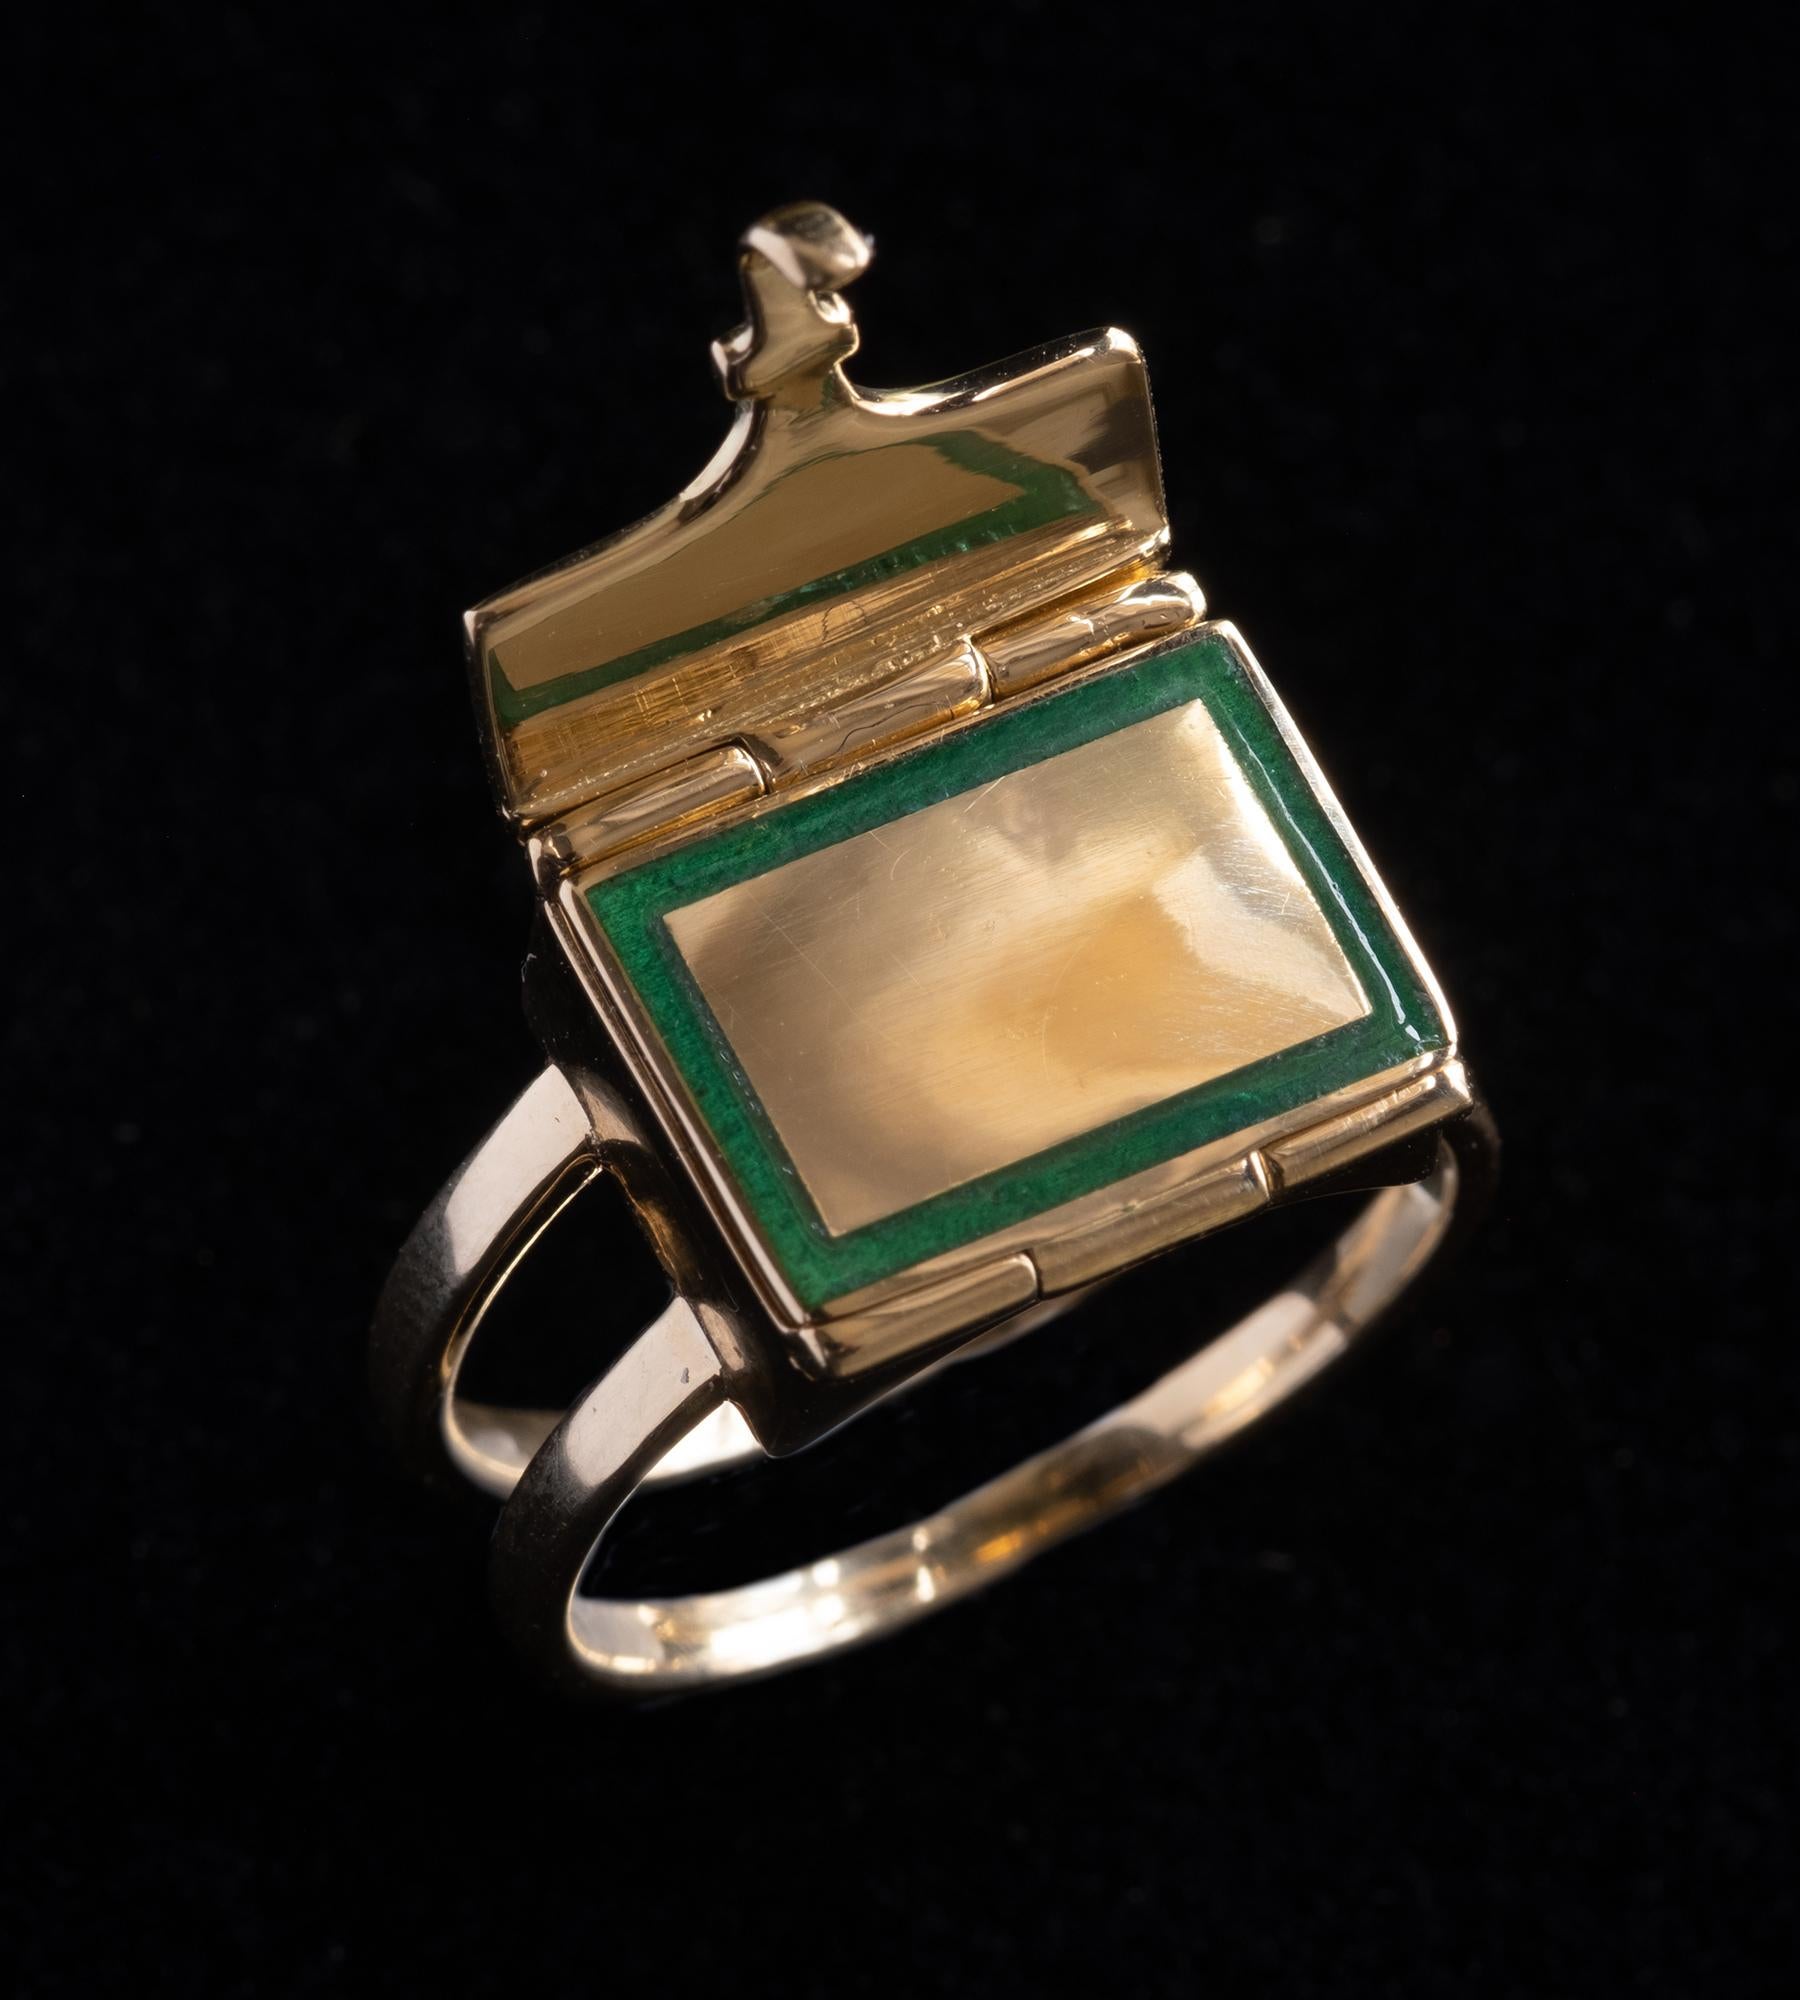 Regency The Fleur Fairfax Book Ring in 18ct Gold and Enamel - Serpentine Green US 5.75 For Sale